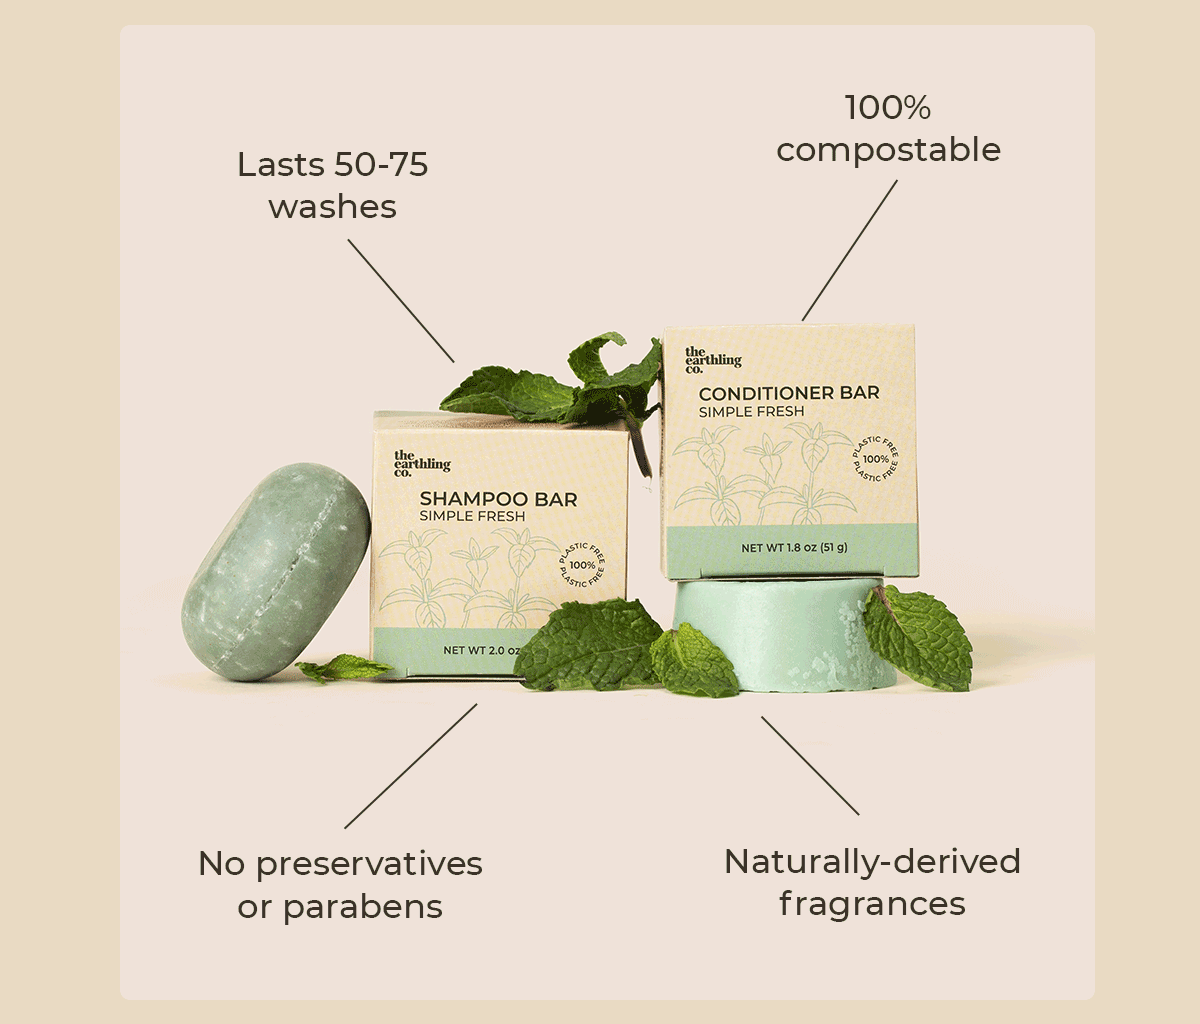 Naturally-derived fragrances, Lasts 50-75 washes, 100% compostable, No preservatives or parabens